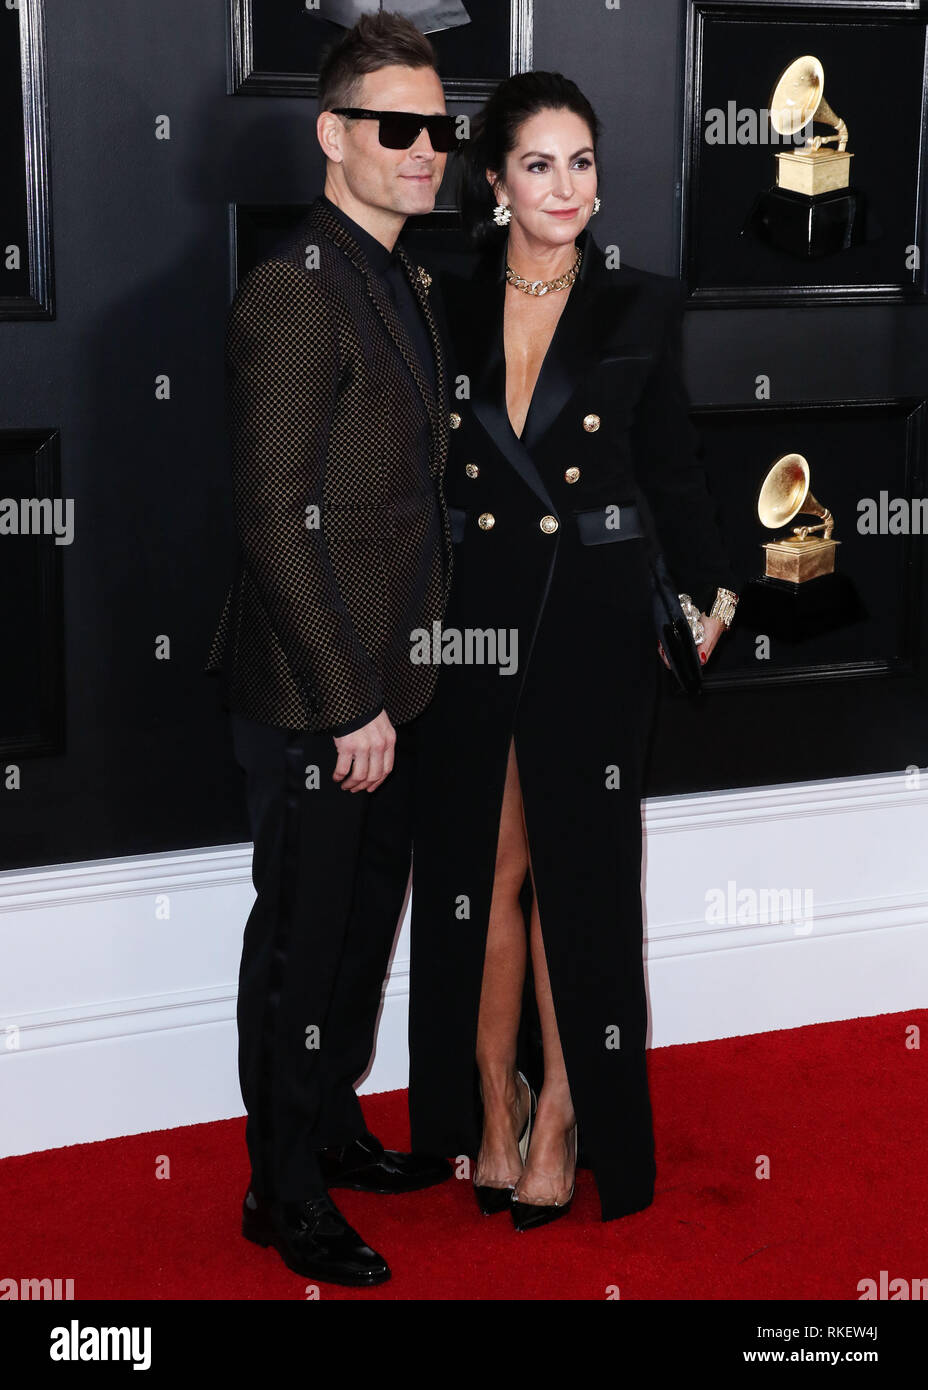 Los Angeles, United States. 10th Feb, 2019.LOS ANGELES, CA, USA - FEBRUARY 10: Kaskade and wife Naomi Raddon arrive at the 61st Annual GRAMMY Awards held at Staples Center on February 10, 2019 in Los Angeles, California, United States. (Photo by Xavier Collin/Image Press Agency) Credit: Image Press Agency/Alamy Live News Stock Photo